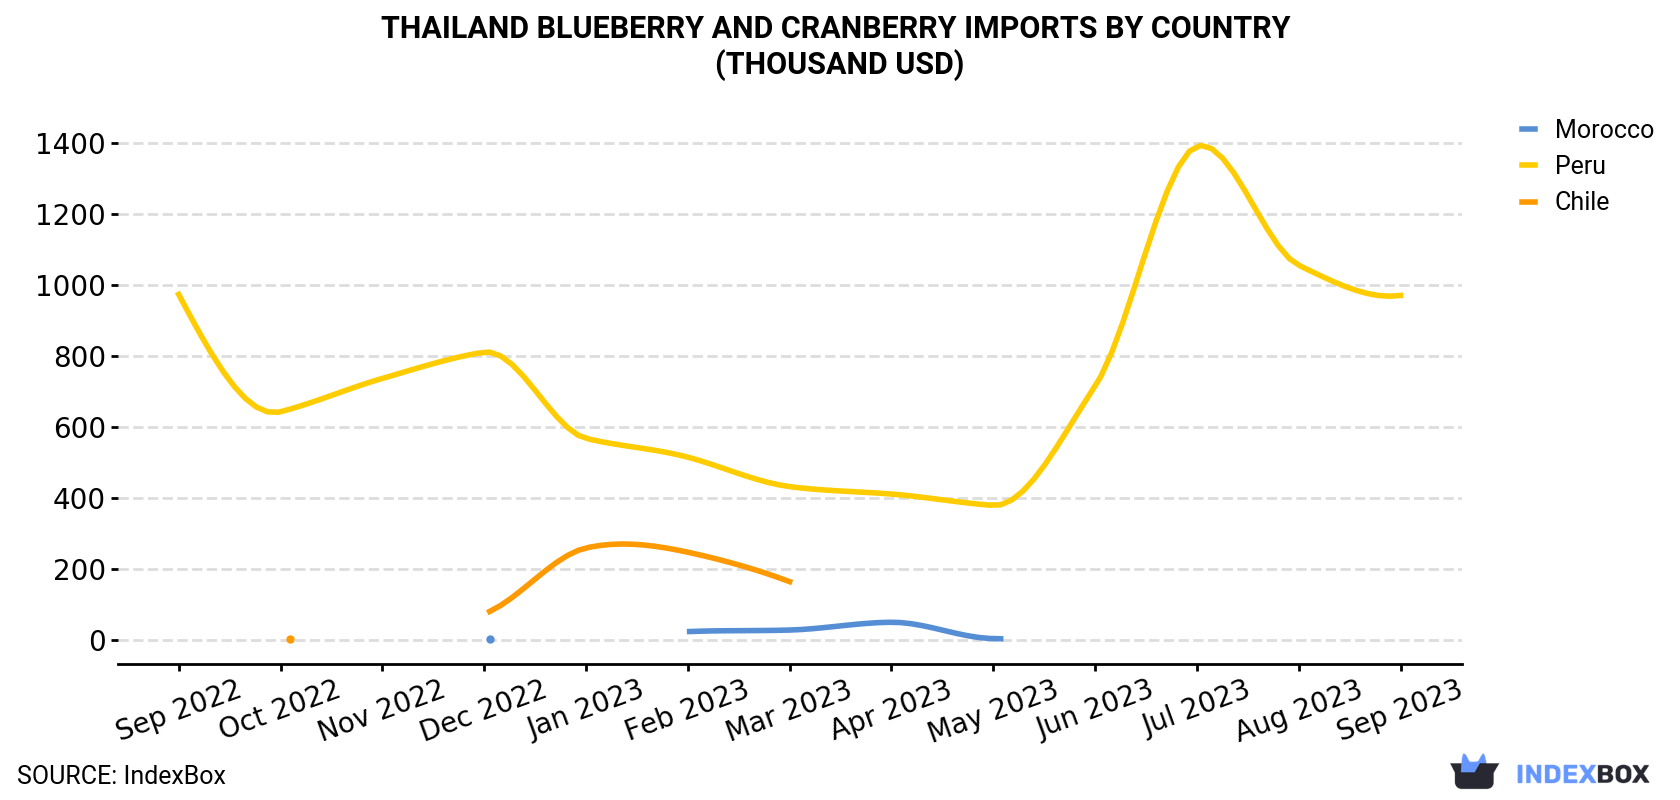 Thailand Blueberry And Cranberry Imports By Country (Thousand USD)